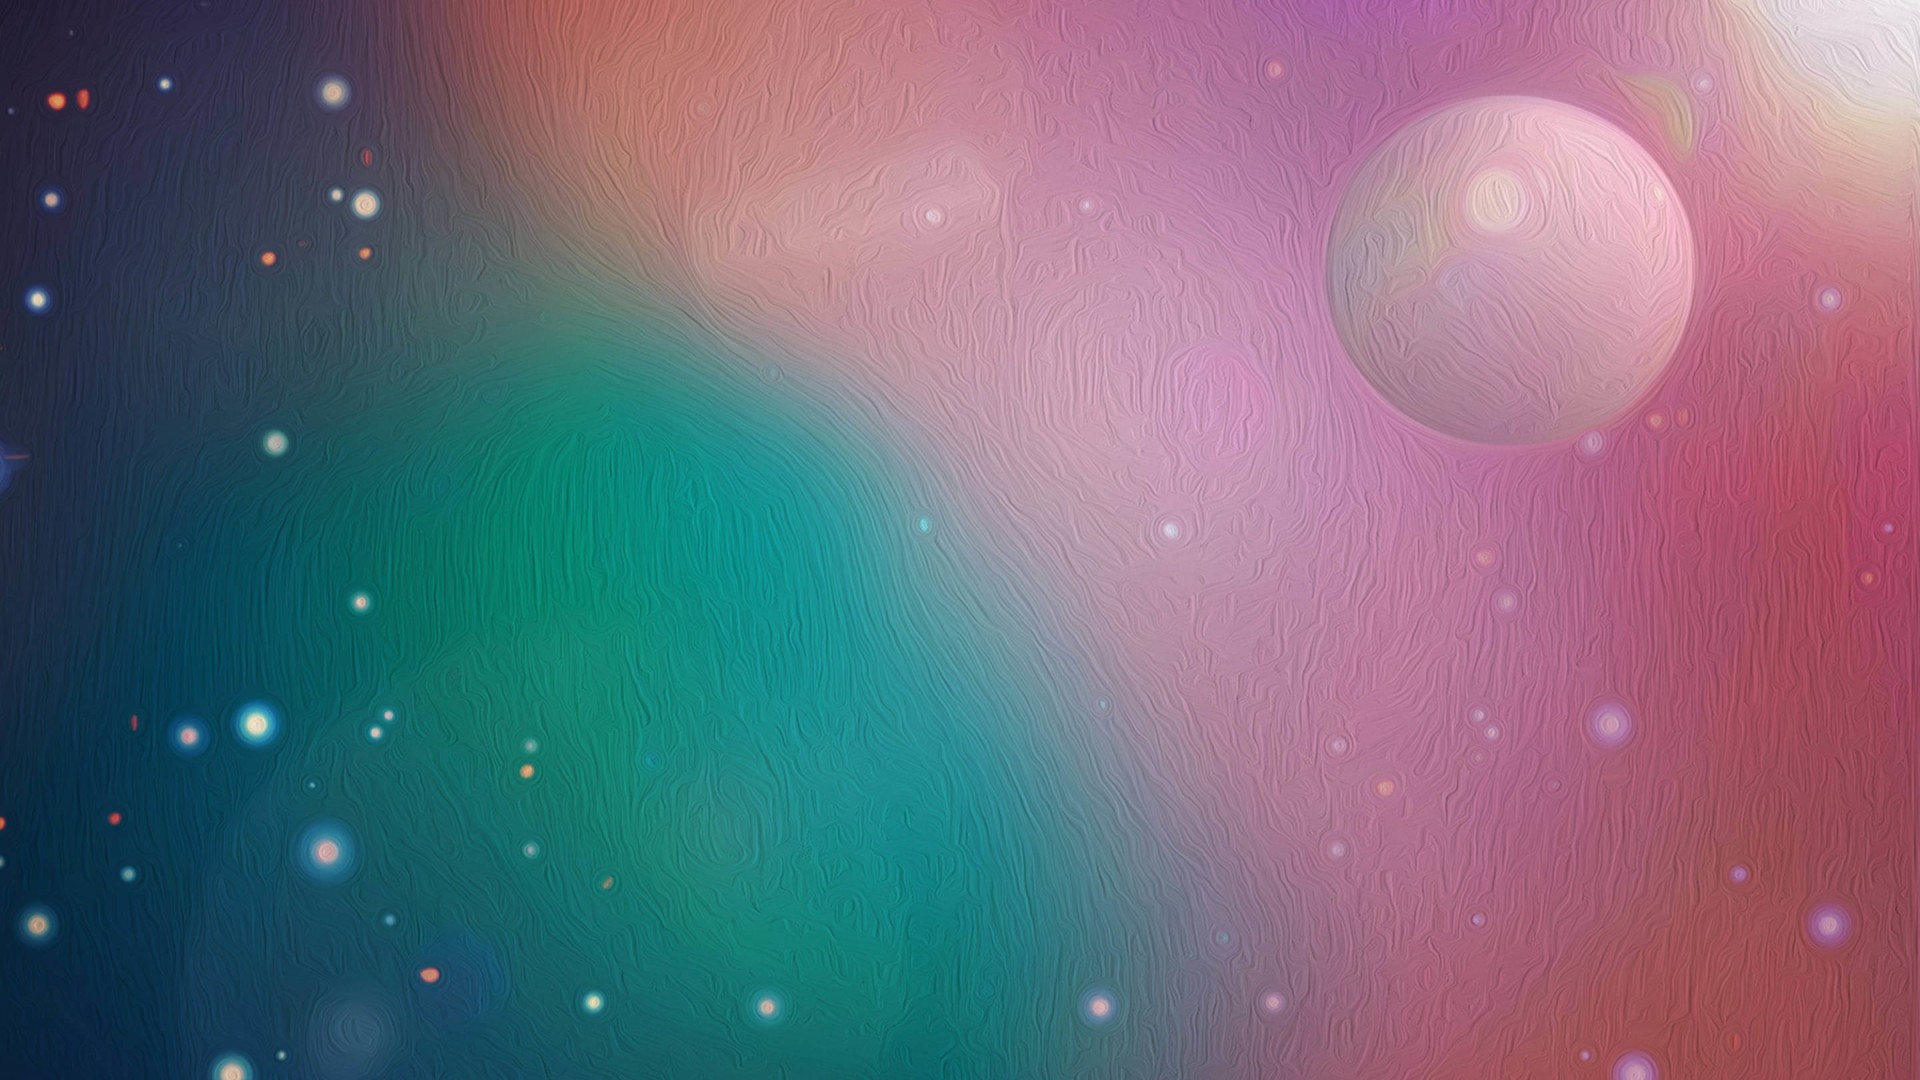 Outer Space Oil Painting Wallpaper for Desktop 1920x1080